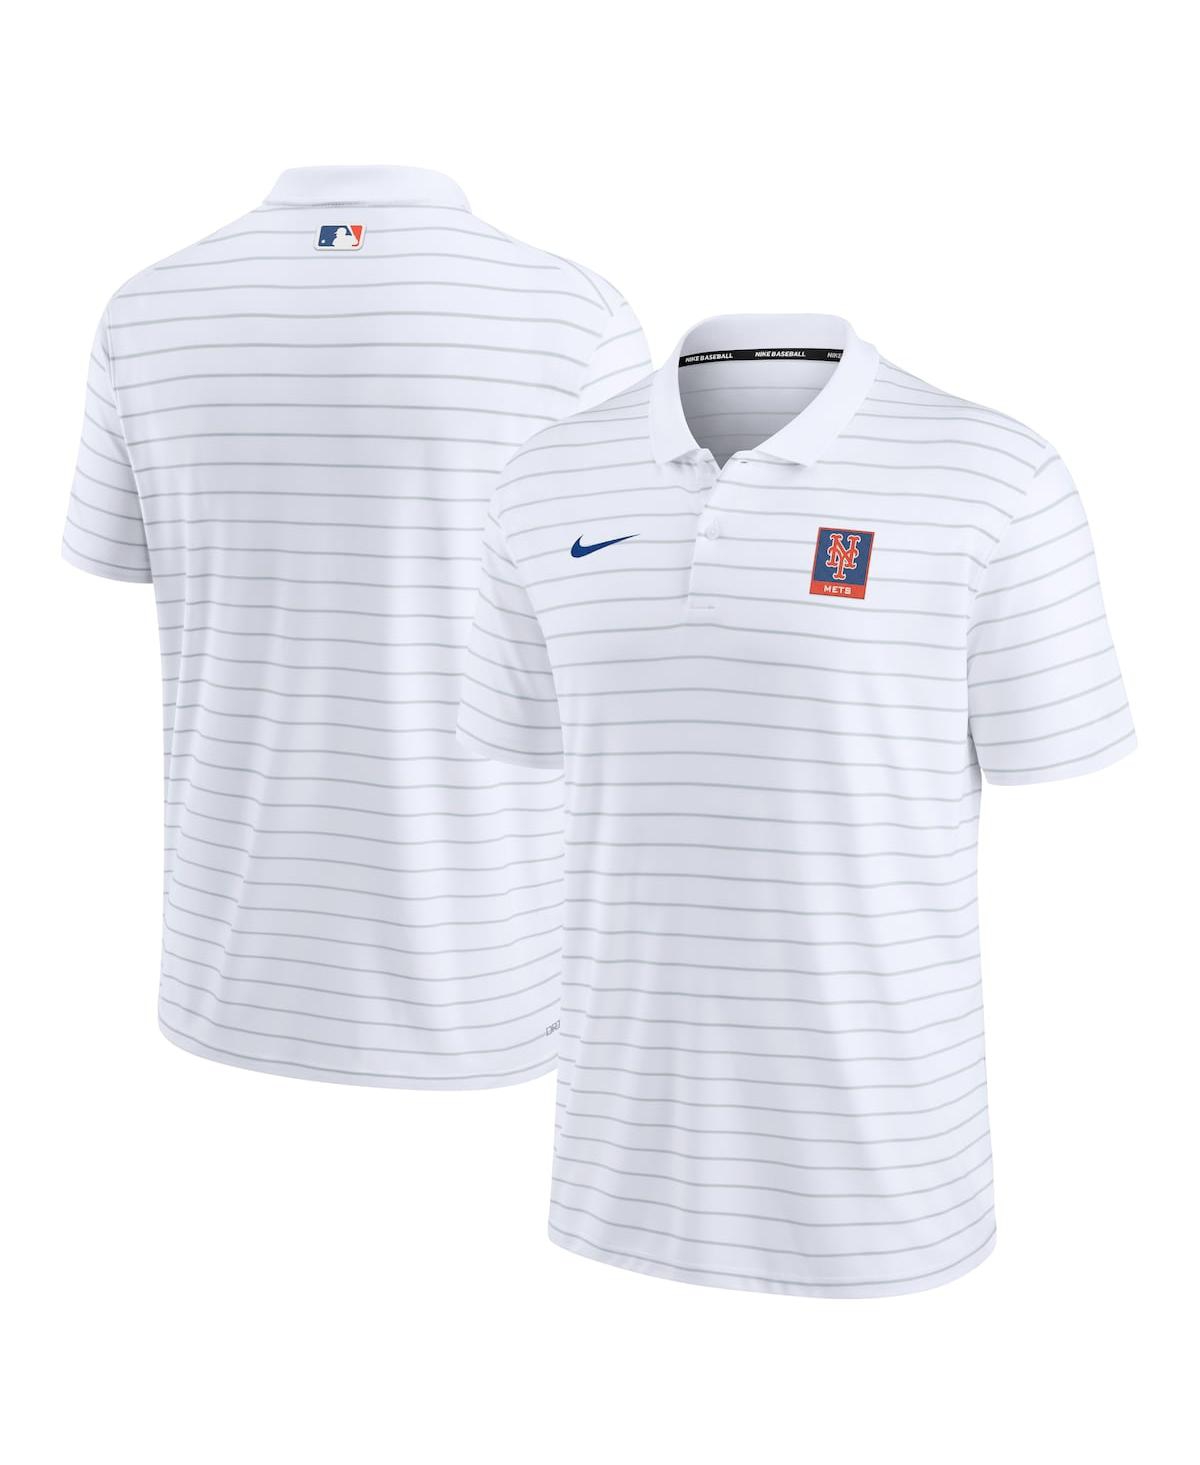 Nike Men's  White New York Mets Authentic Collection Striped Performance Pique Polo Shirt